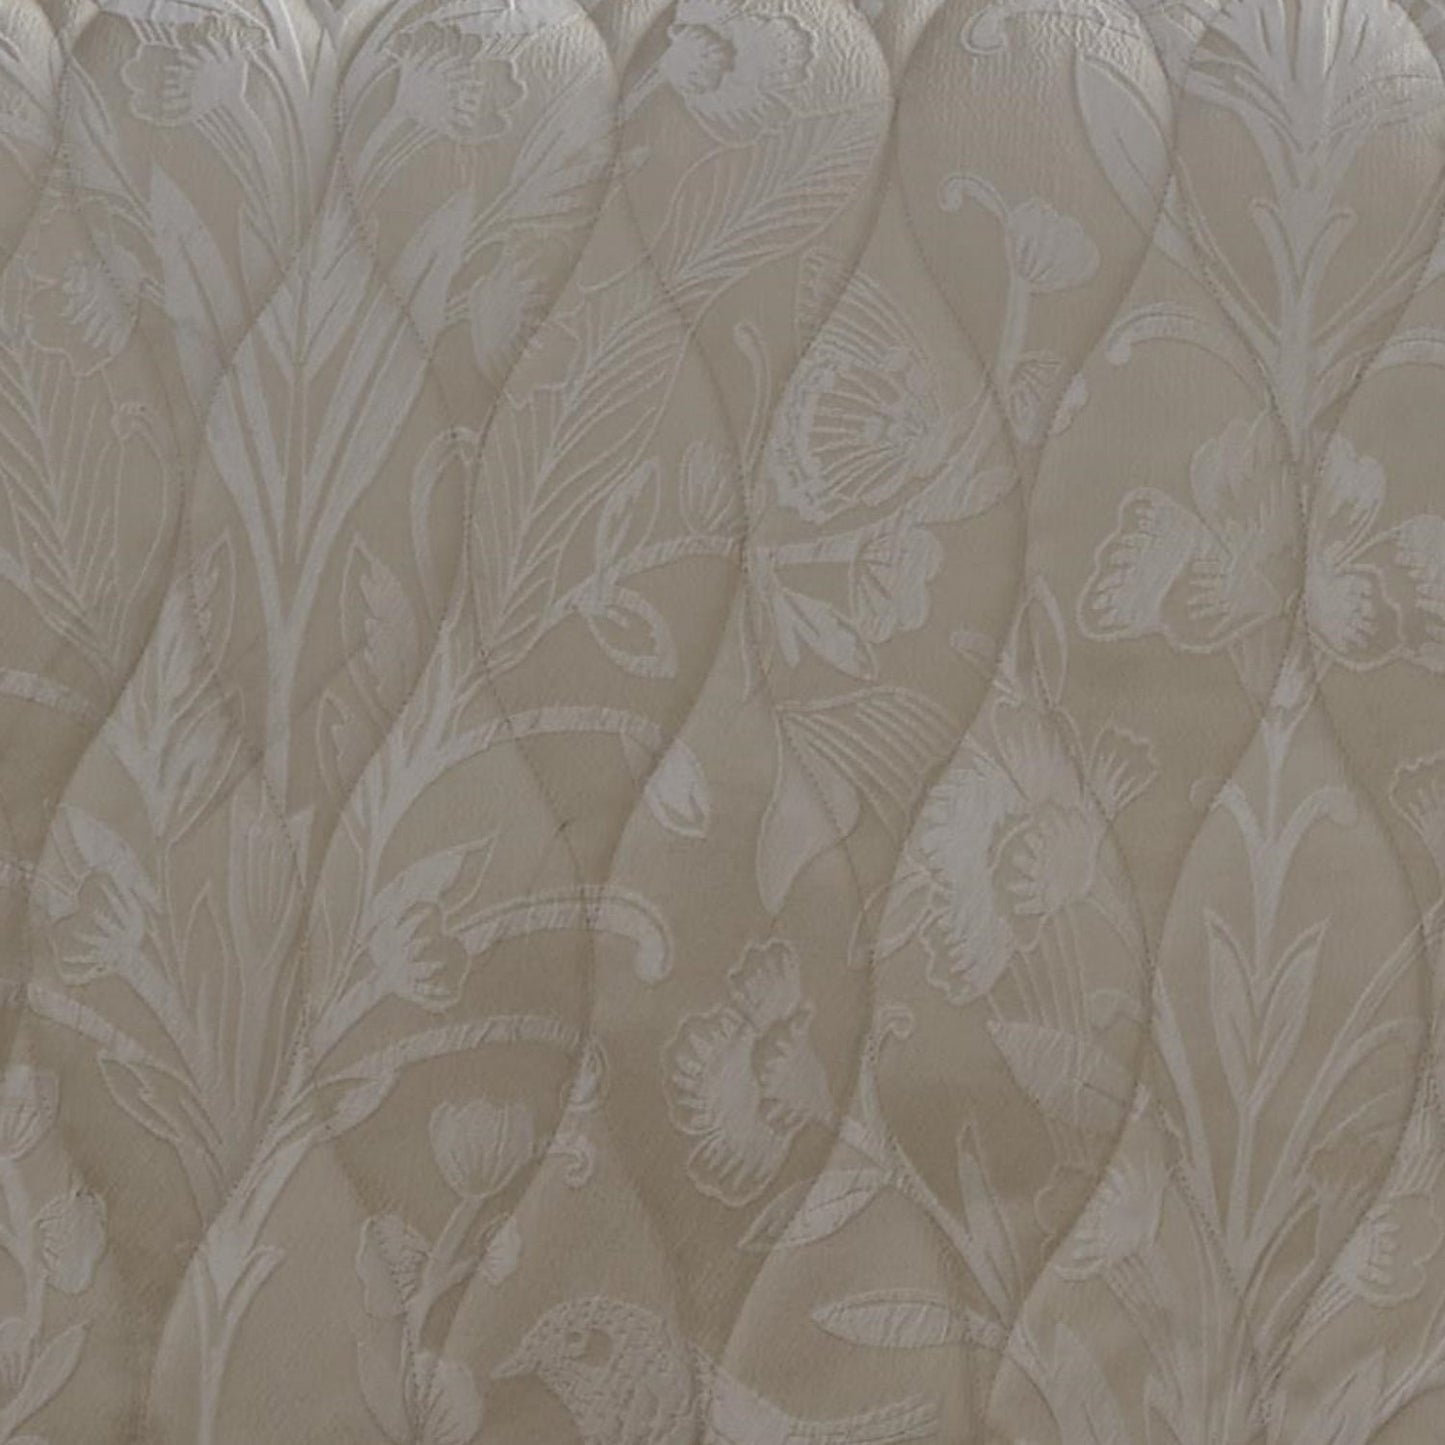 Elysia Champagne Quilted Jacquard Bedspread